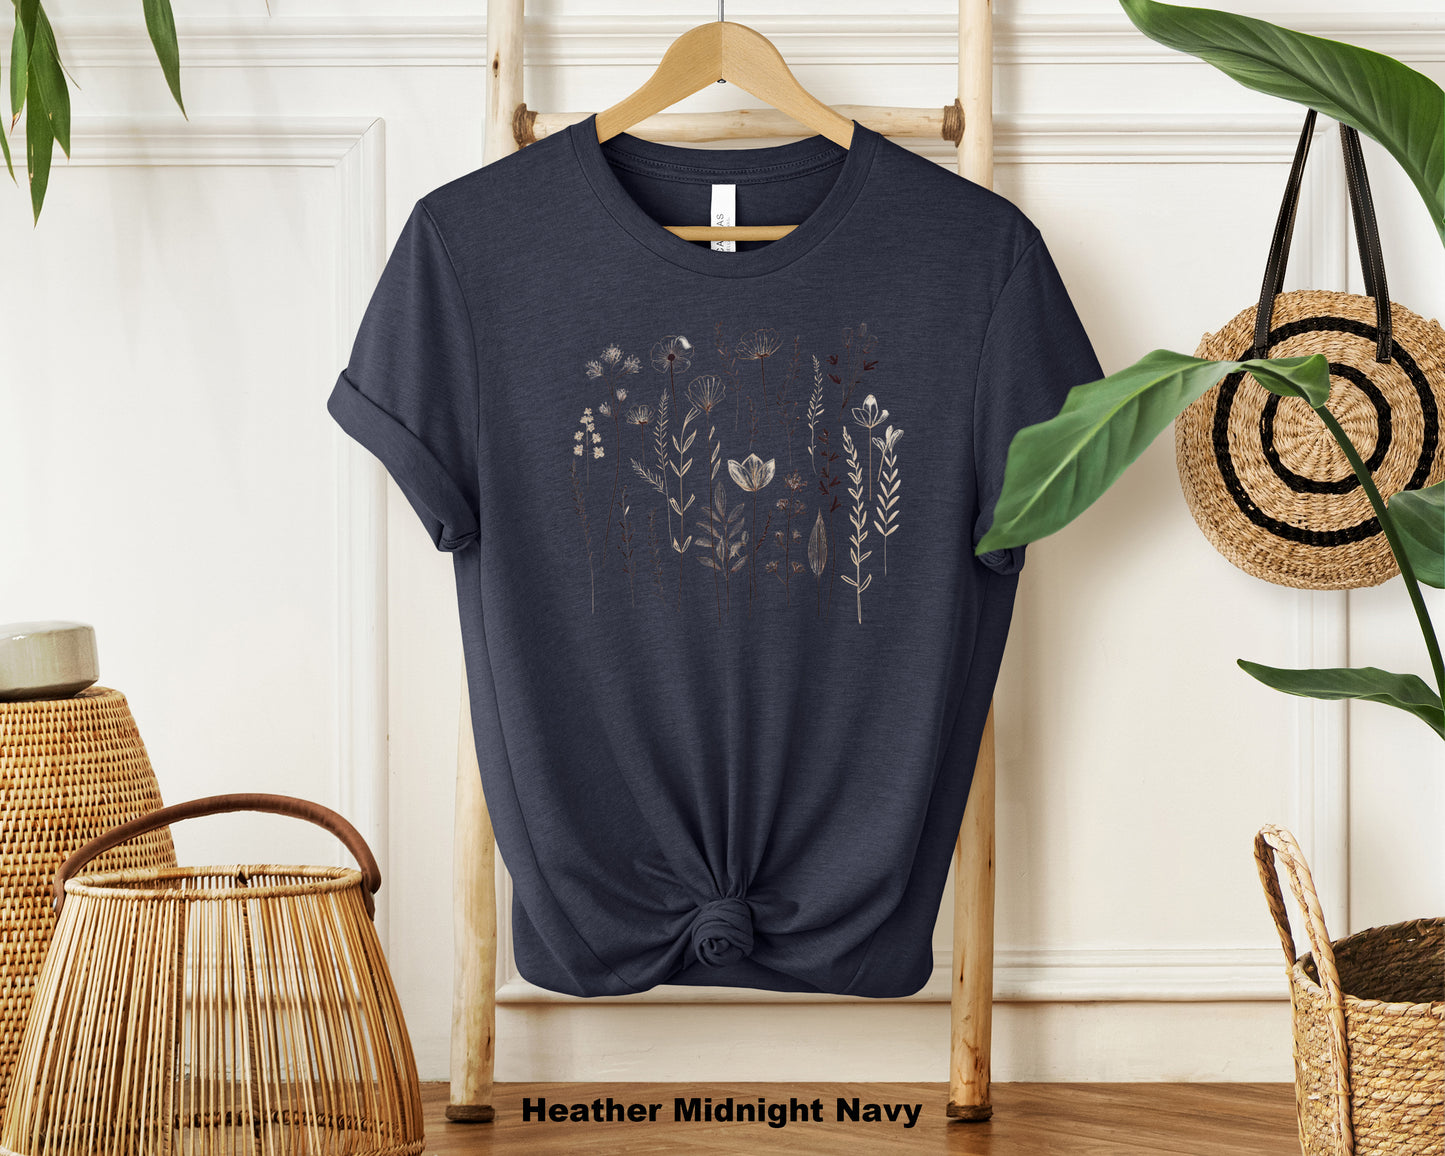 Botanical Harmony Women's Floral Graphic Tee - Wildflower Lover's Delight